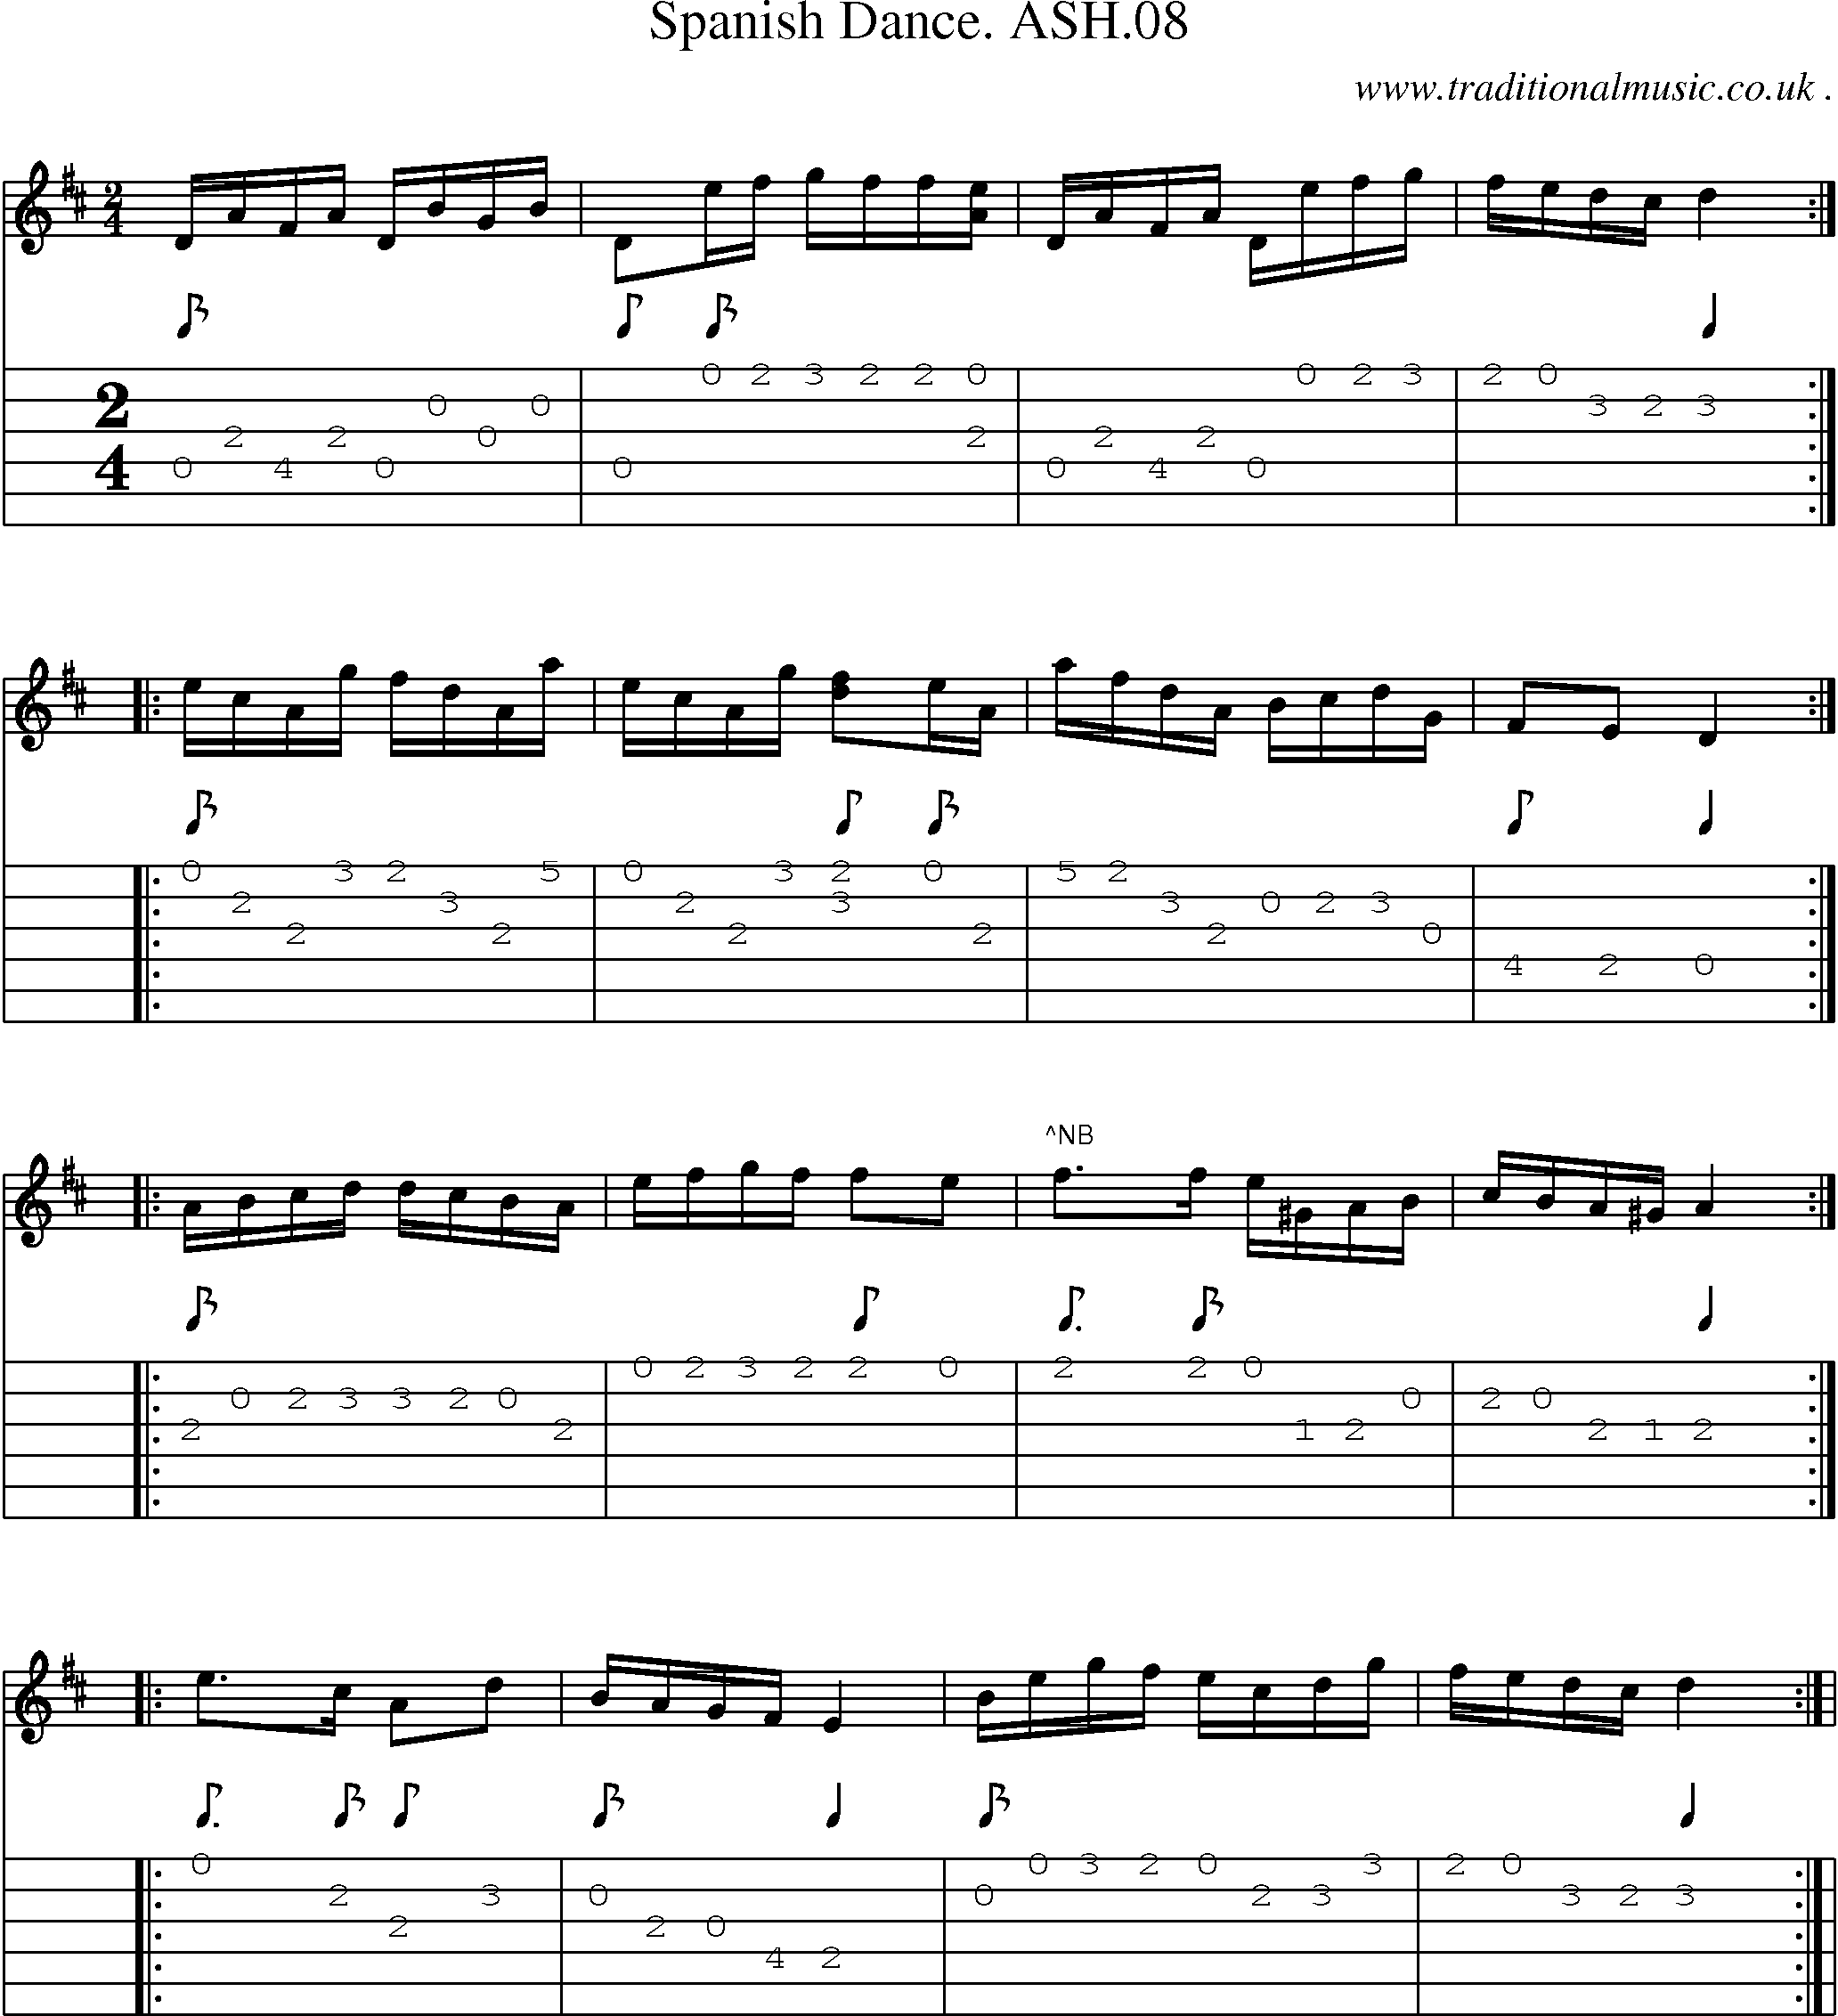 Sheet-Music and Guitar Tabs for Spanish Dance Ash08